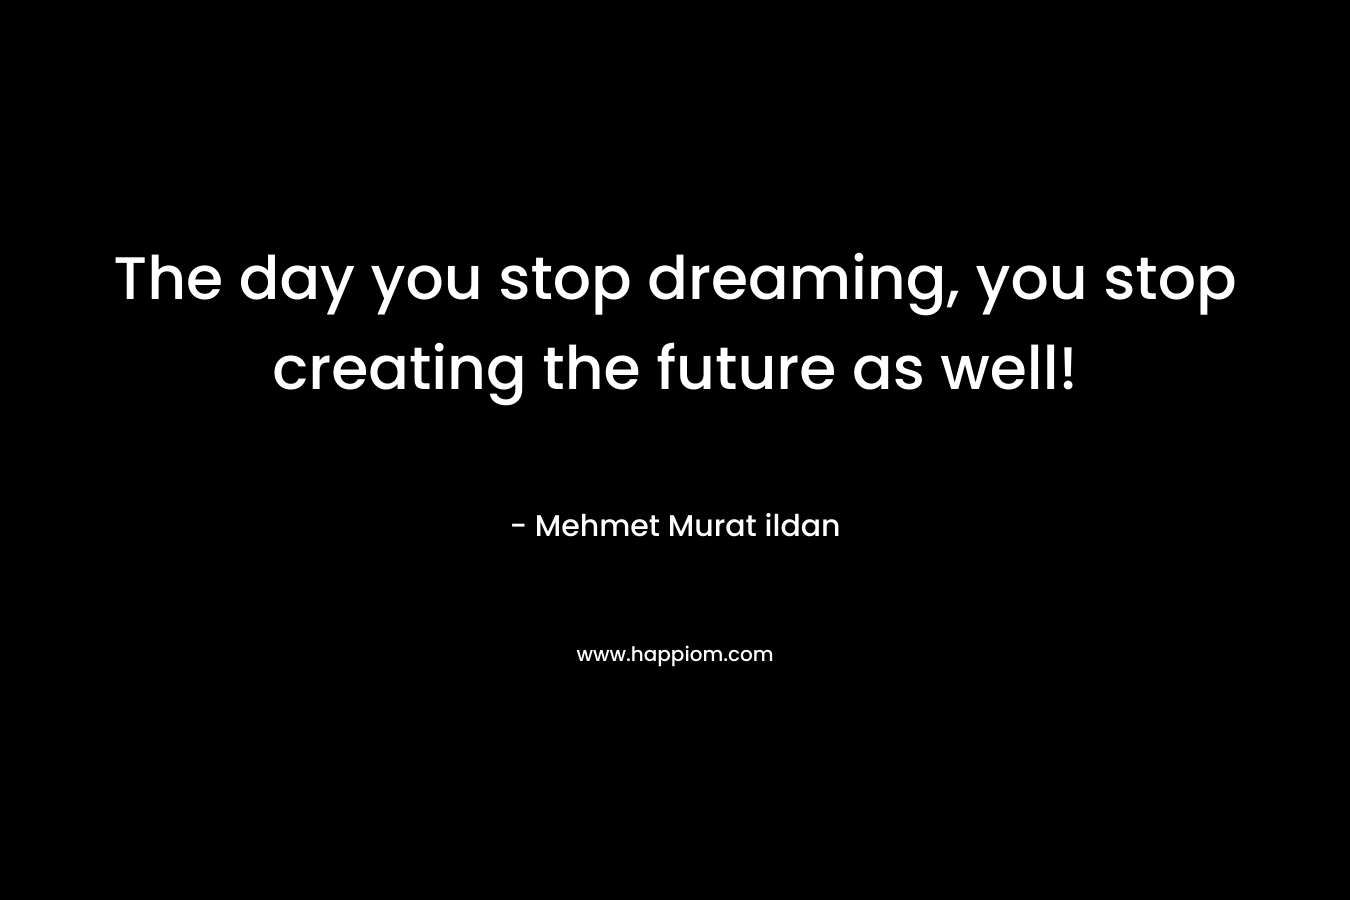 The day you stop dreaming, you stop creating the future as well!